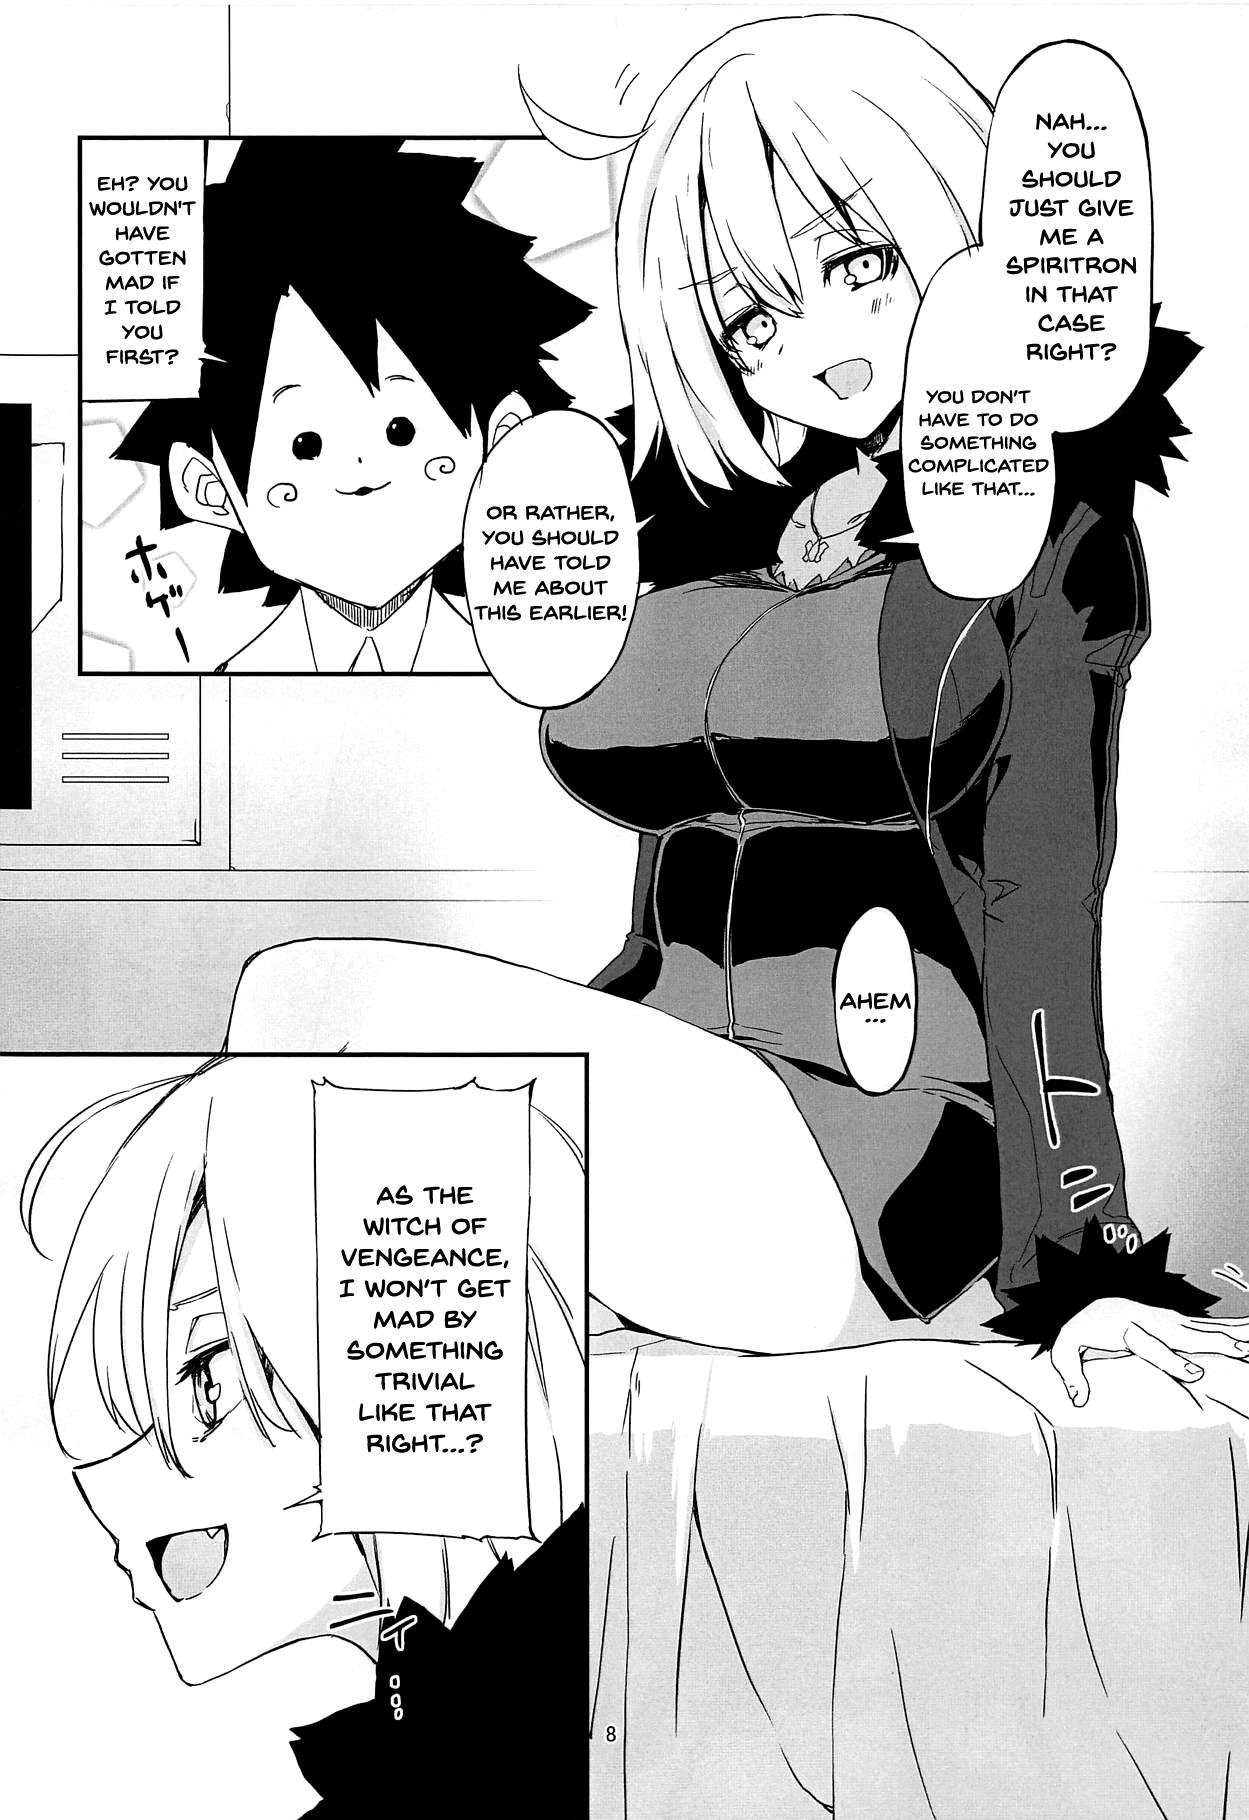 American Uchi no Alter wa Choroi | Our Alter Is So Easy - Fate grand order Couple - Page 6